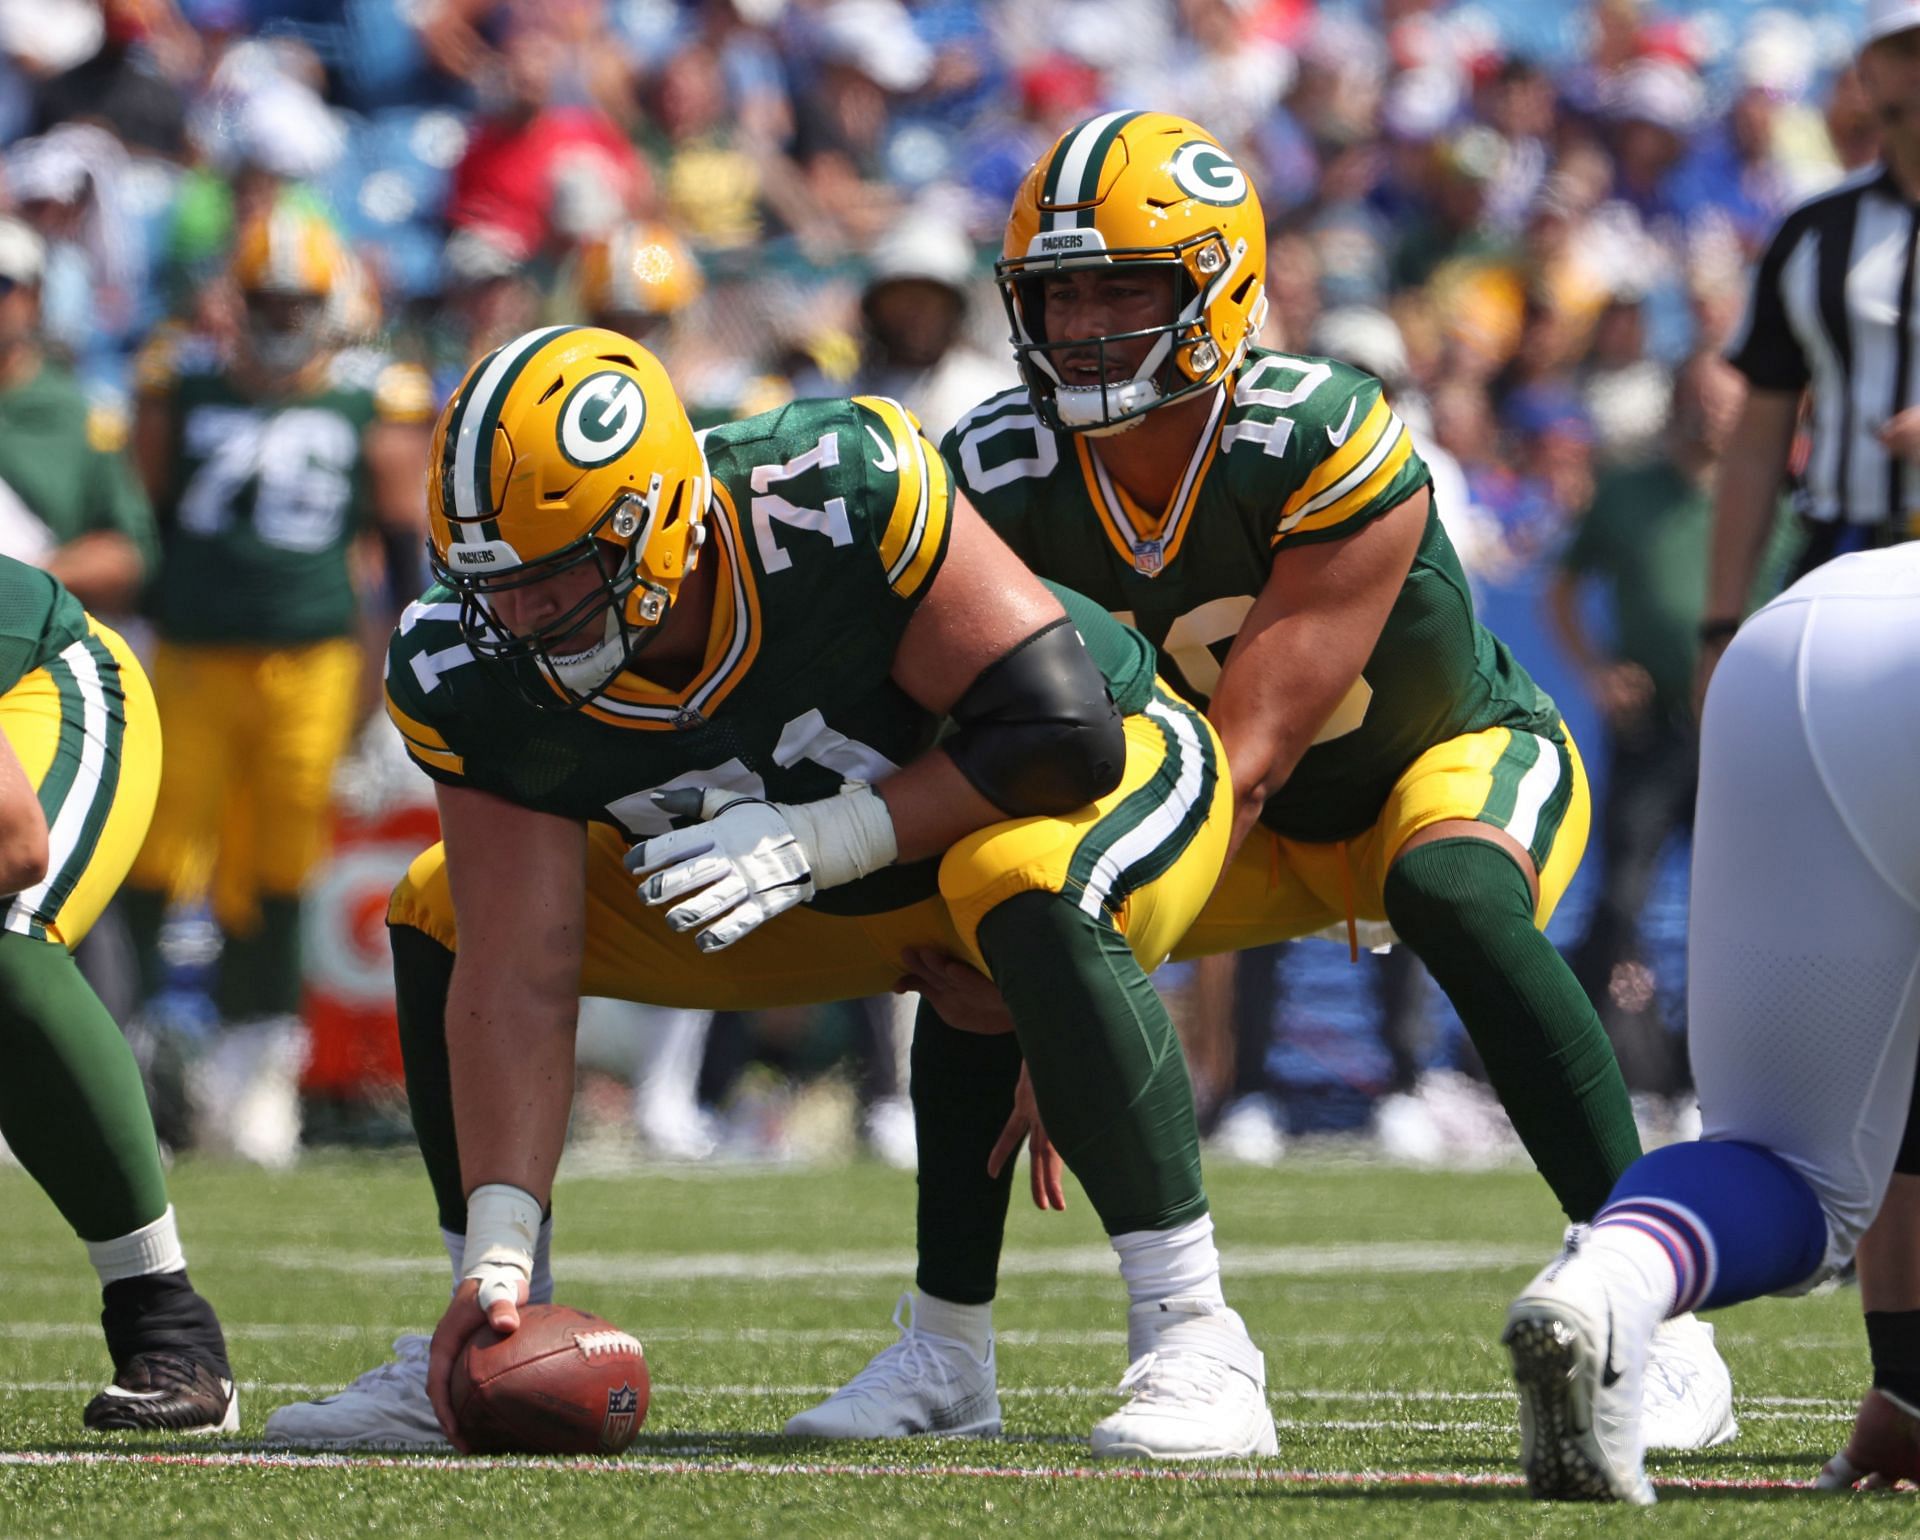 Josh Myers playing for the Green Bay Packers against the Buffalo Bills